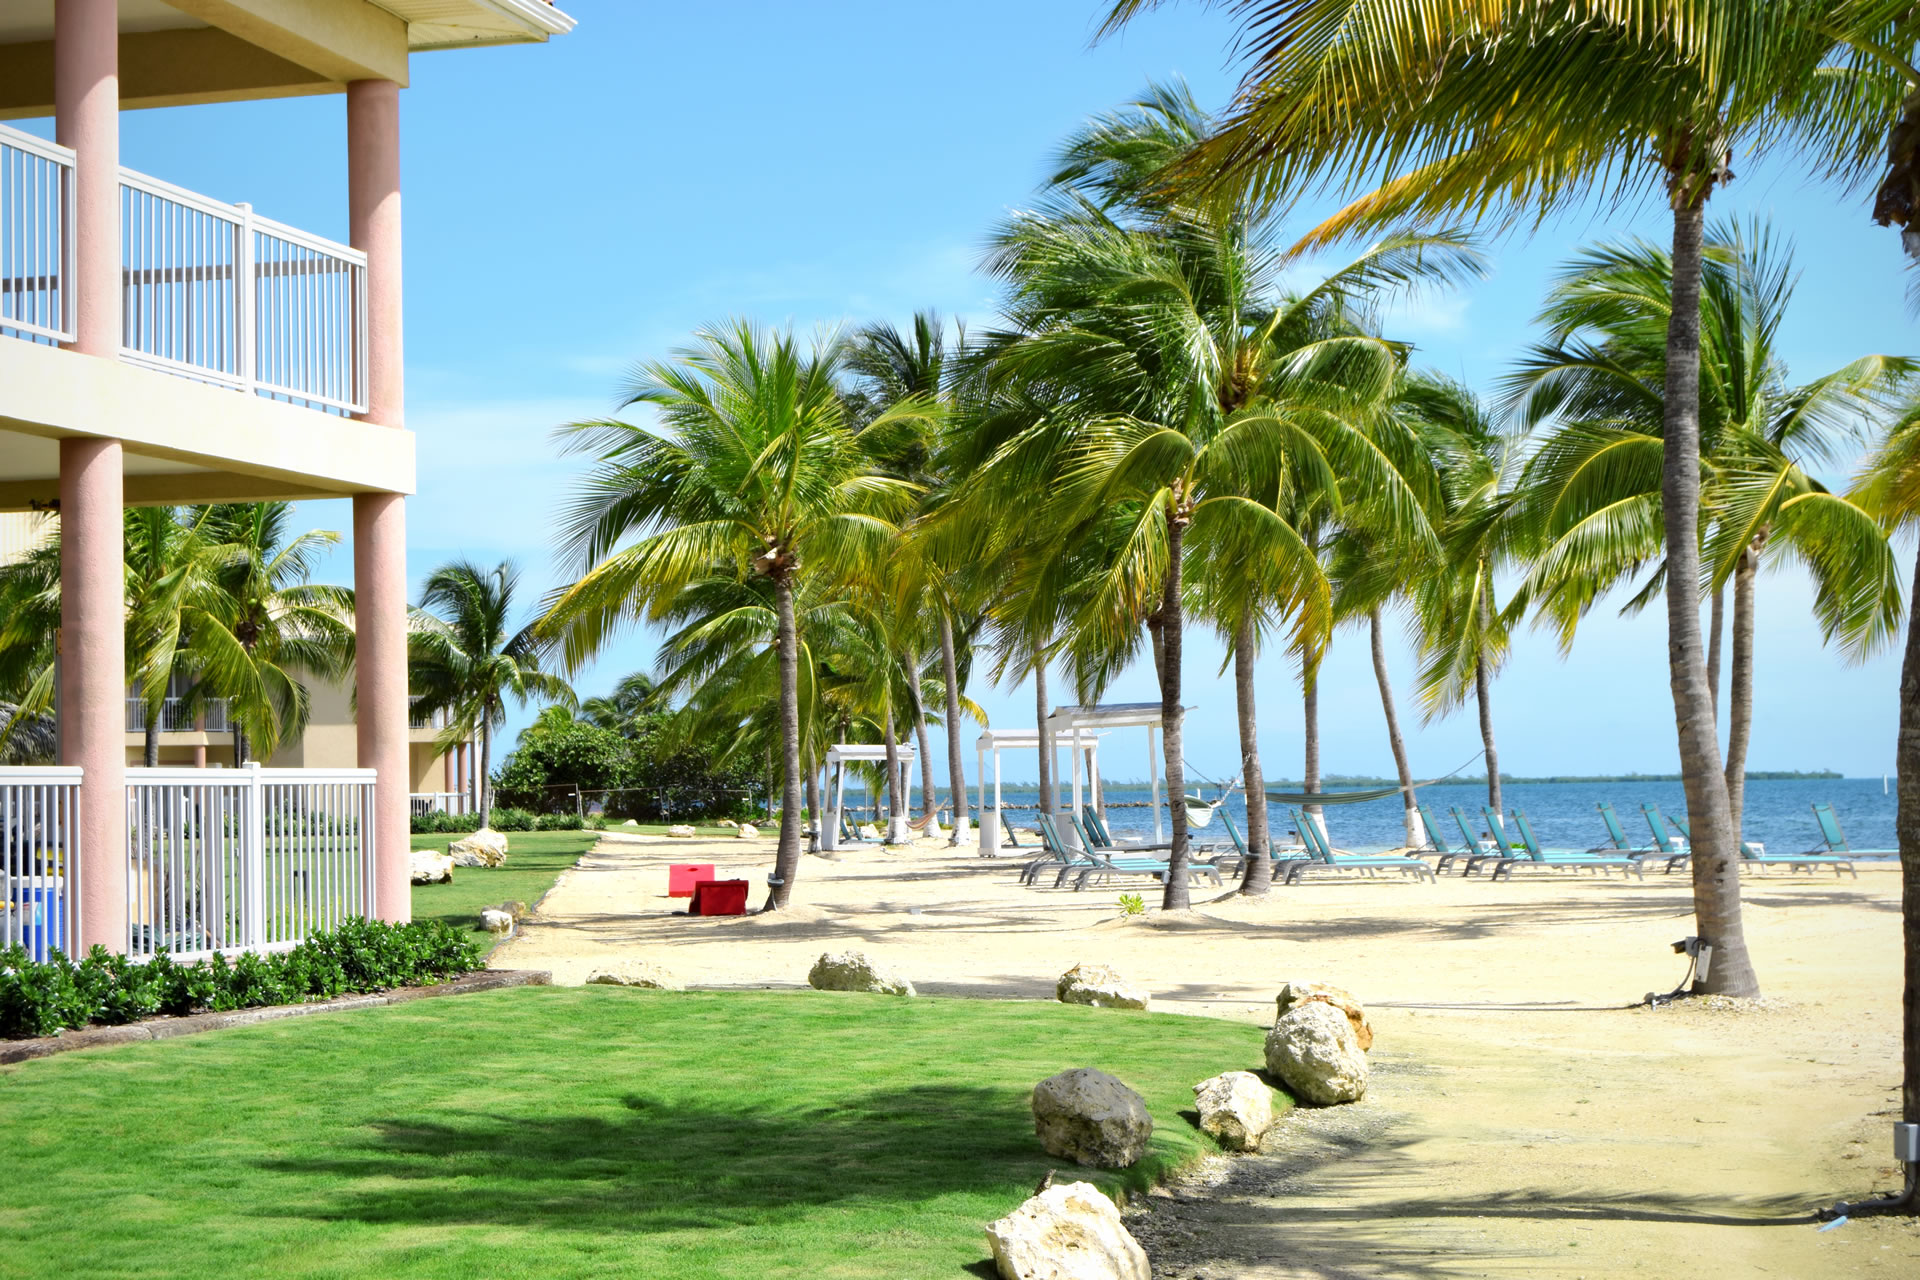 View of palm trees lining the beach at Grand Caymanian Resort.